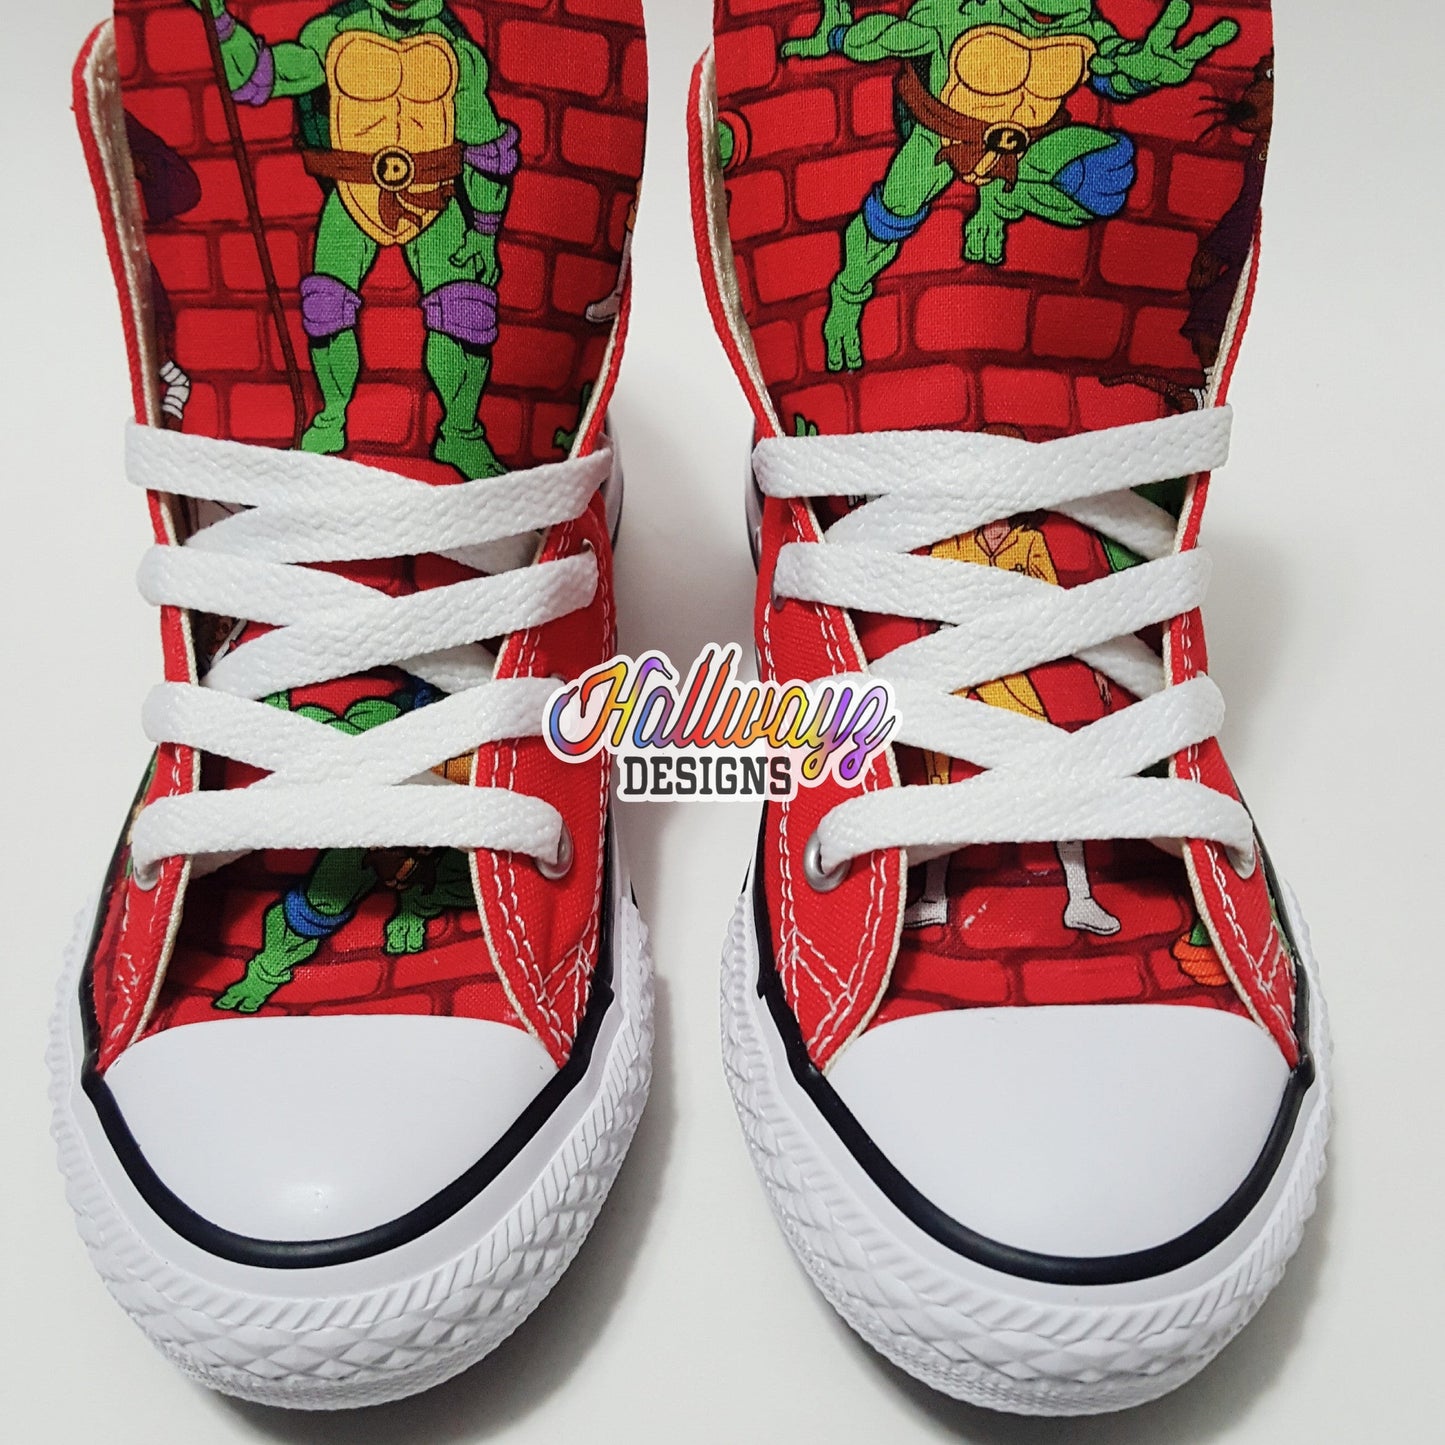 Red Tmnt Converse